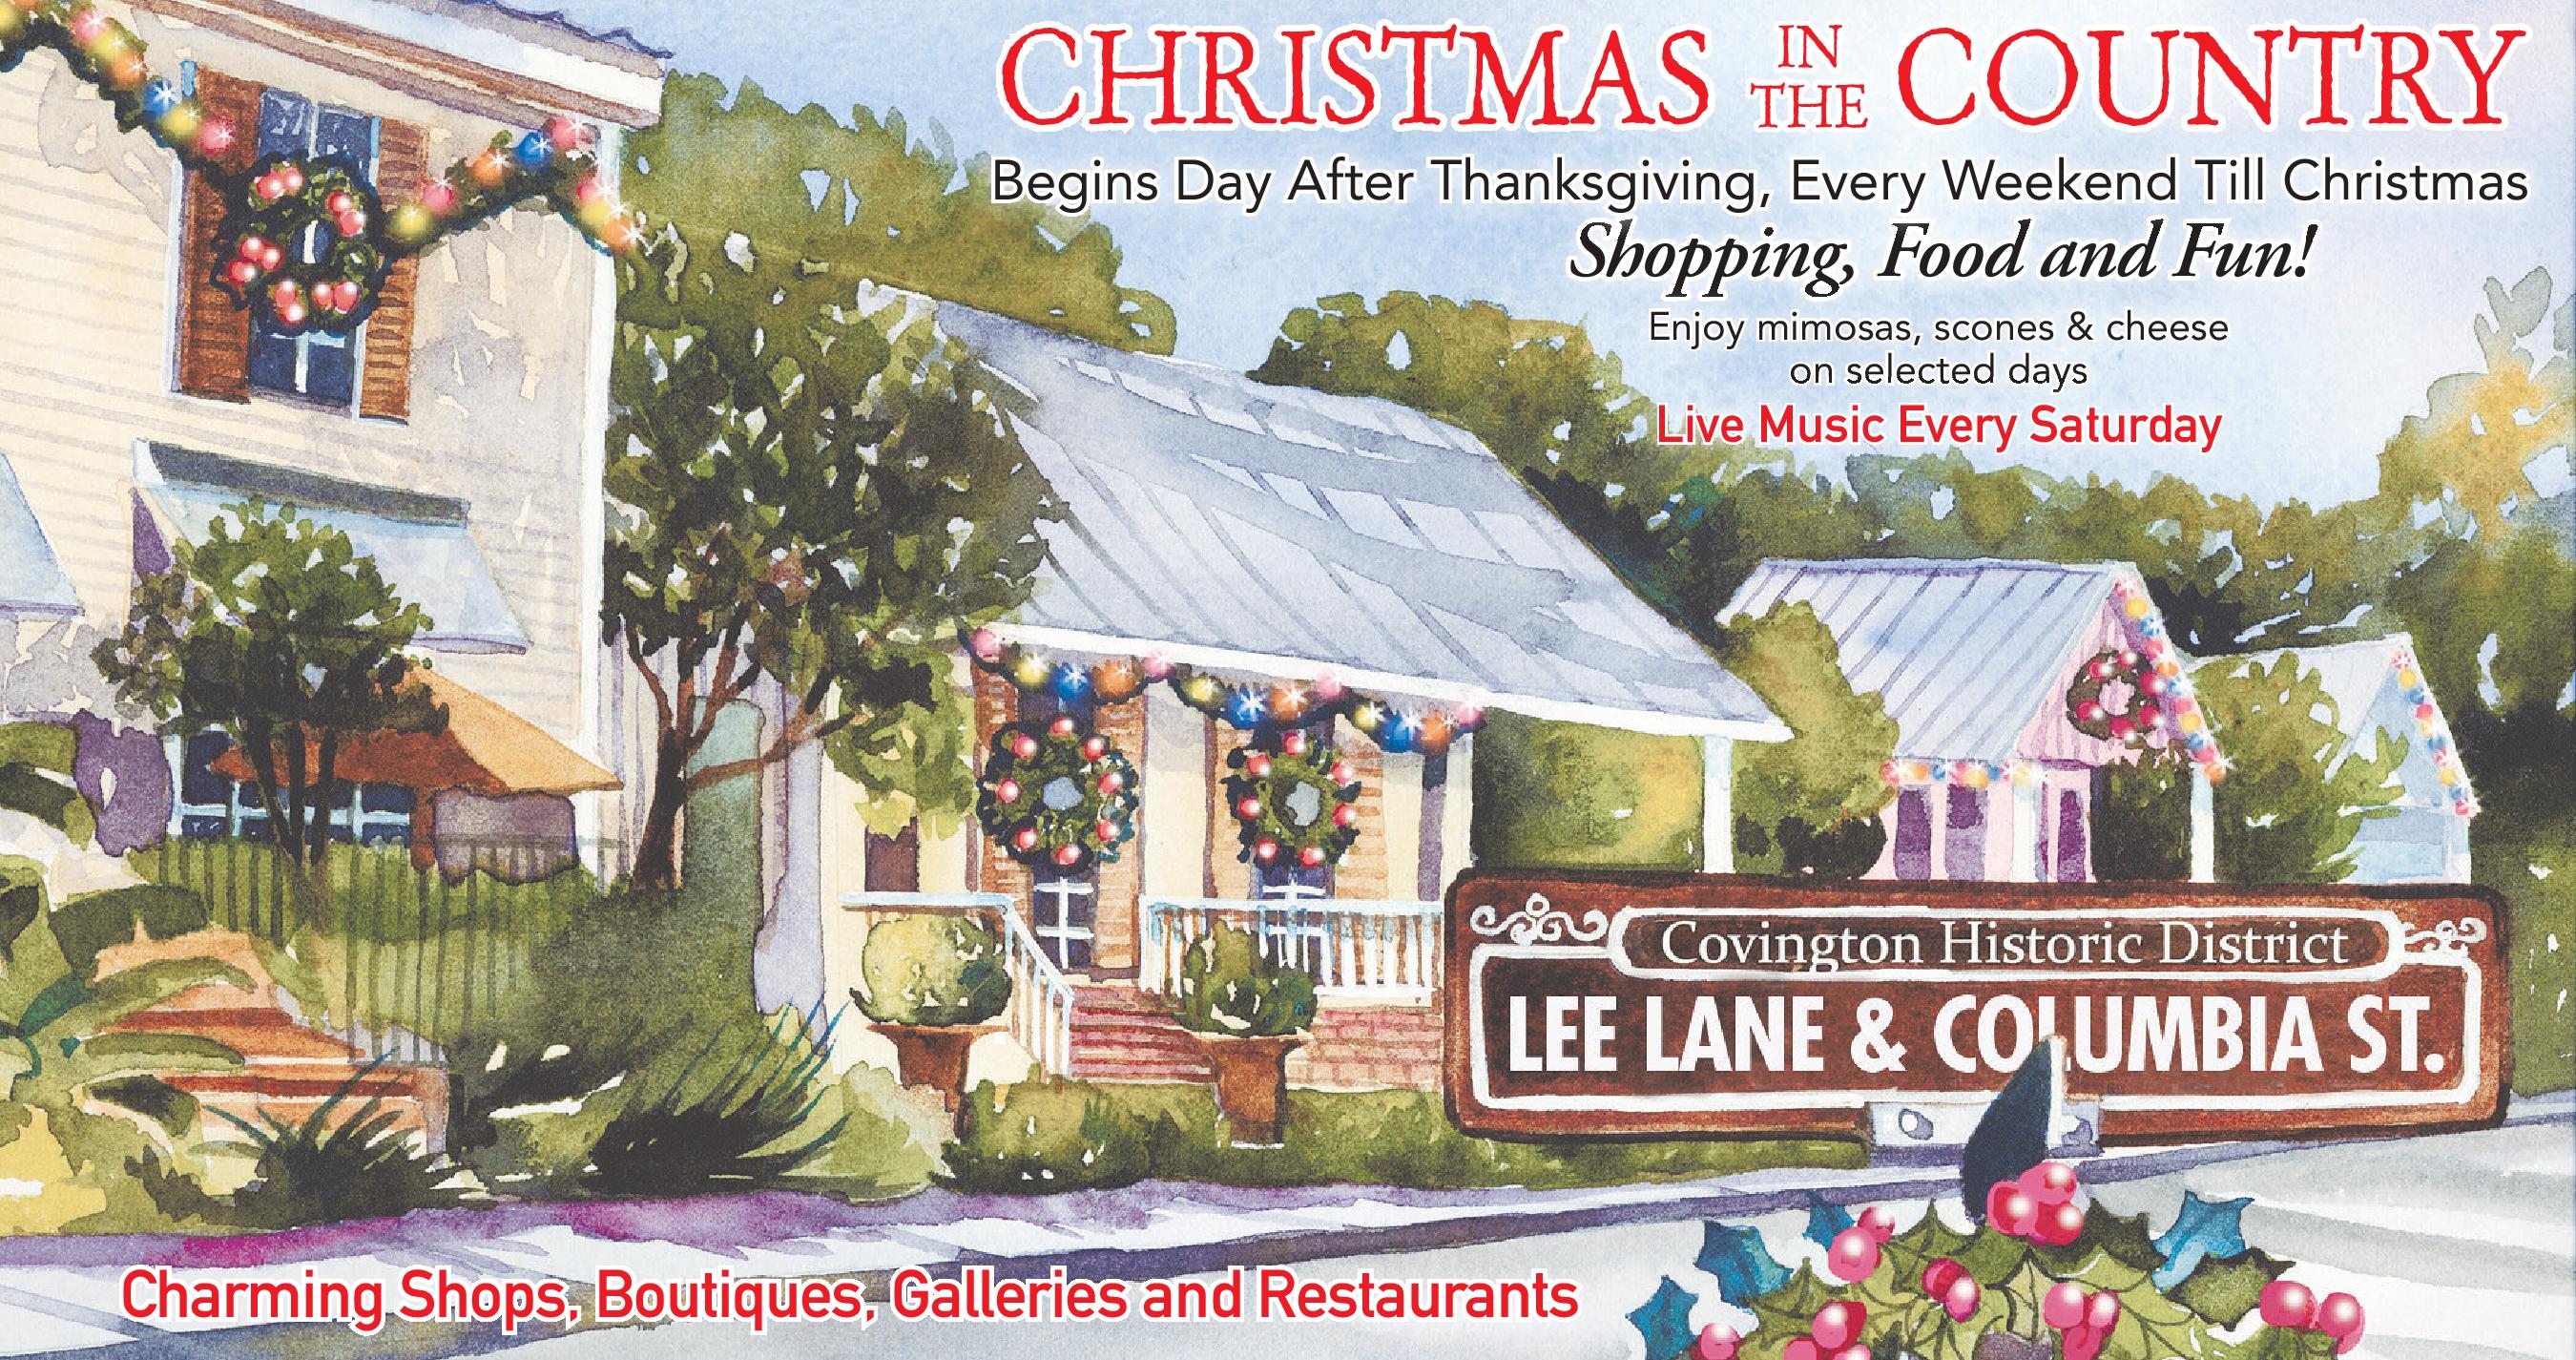 Christmas in the Country Continues This Saturday